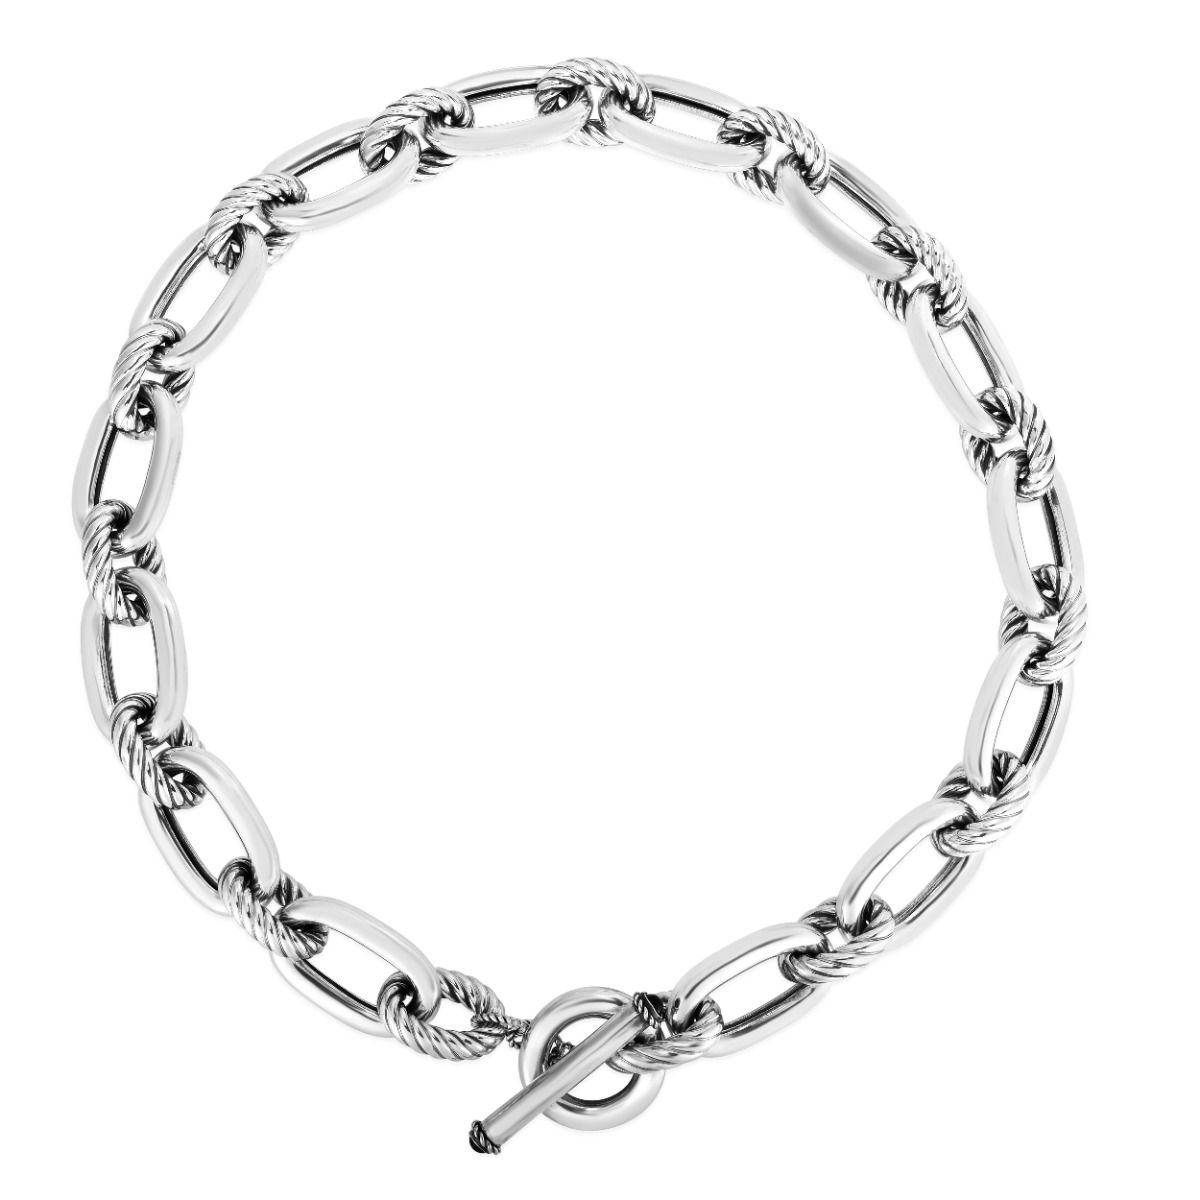 .925 Sterling Silver Wheat chain bracelet, unisex Italian chain - South Paw  Studios Handcrafted Designer Jewelry